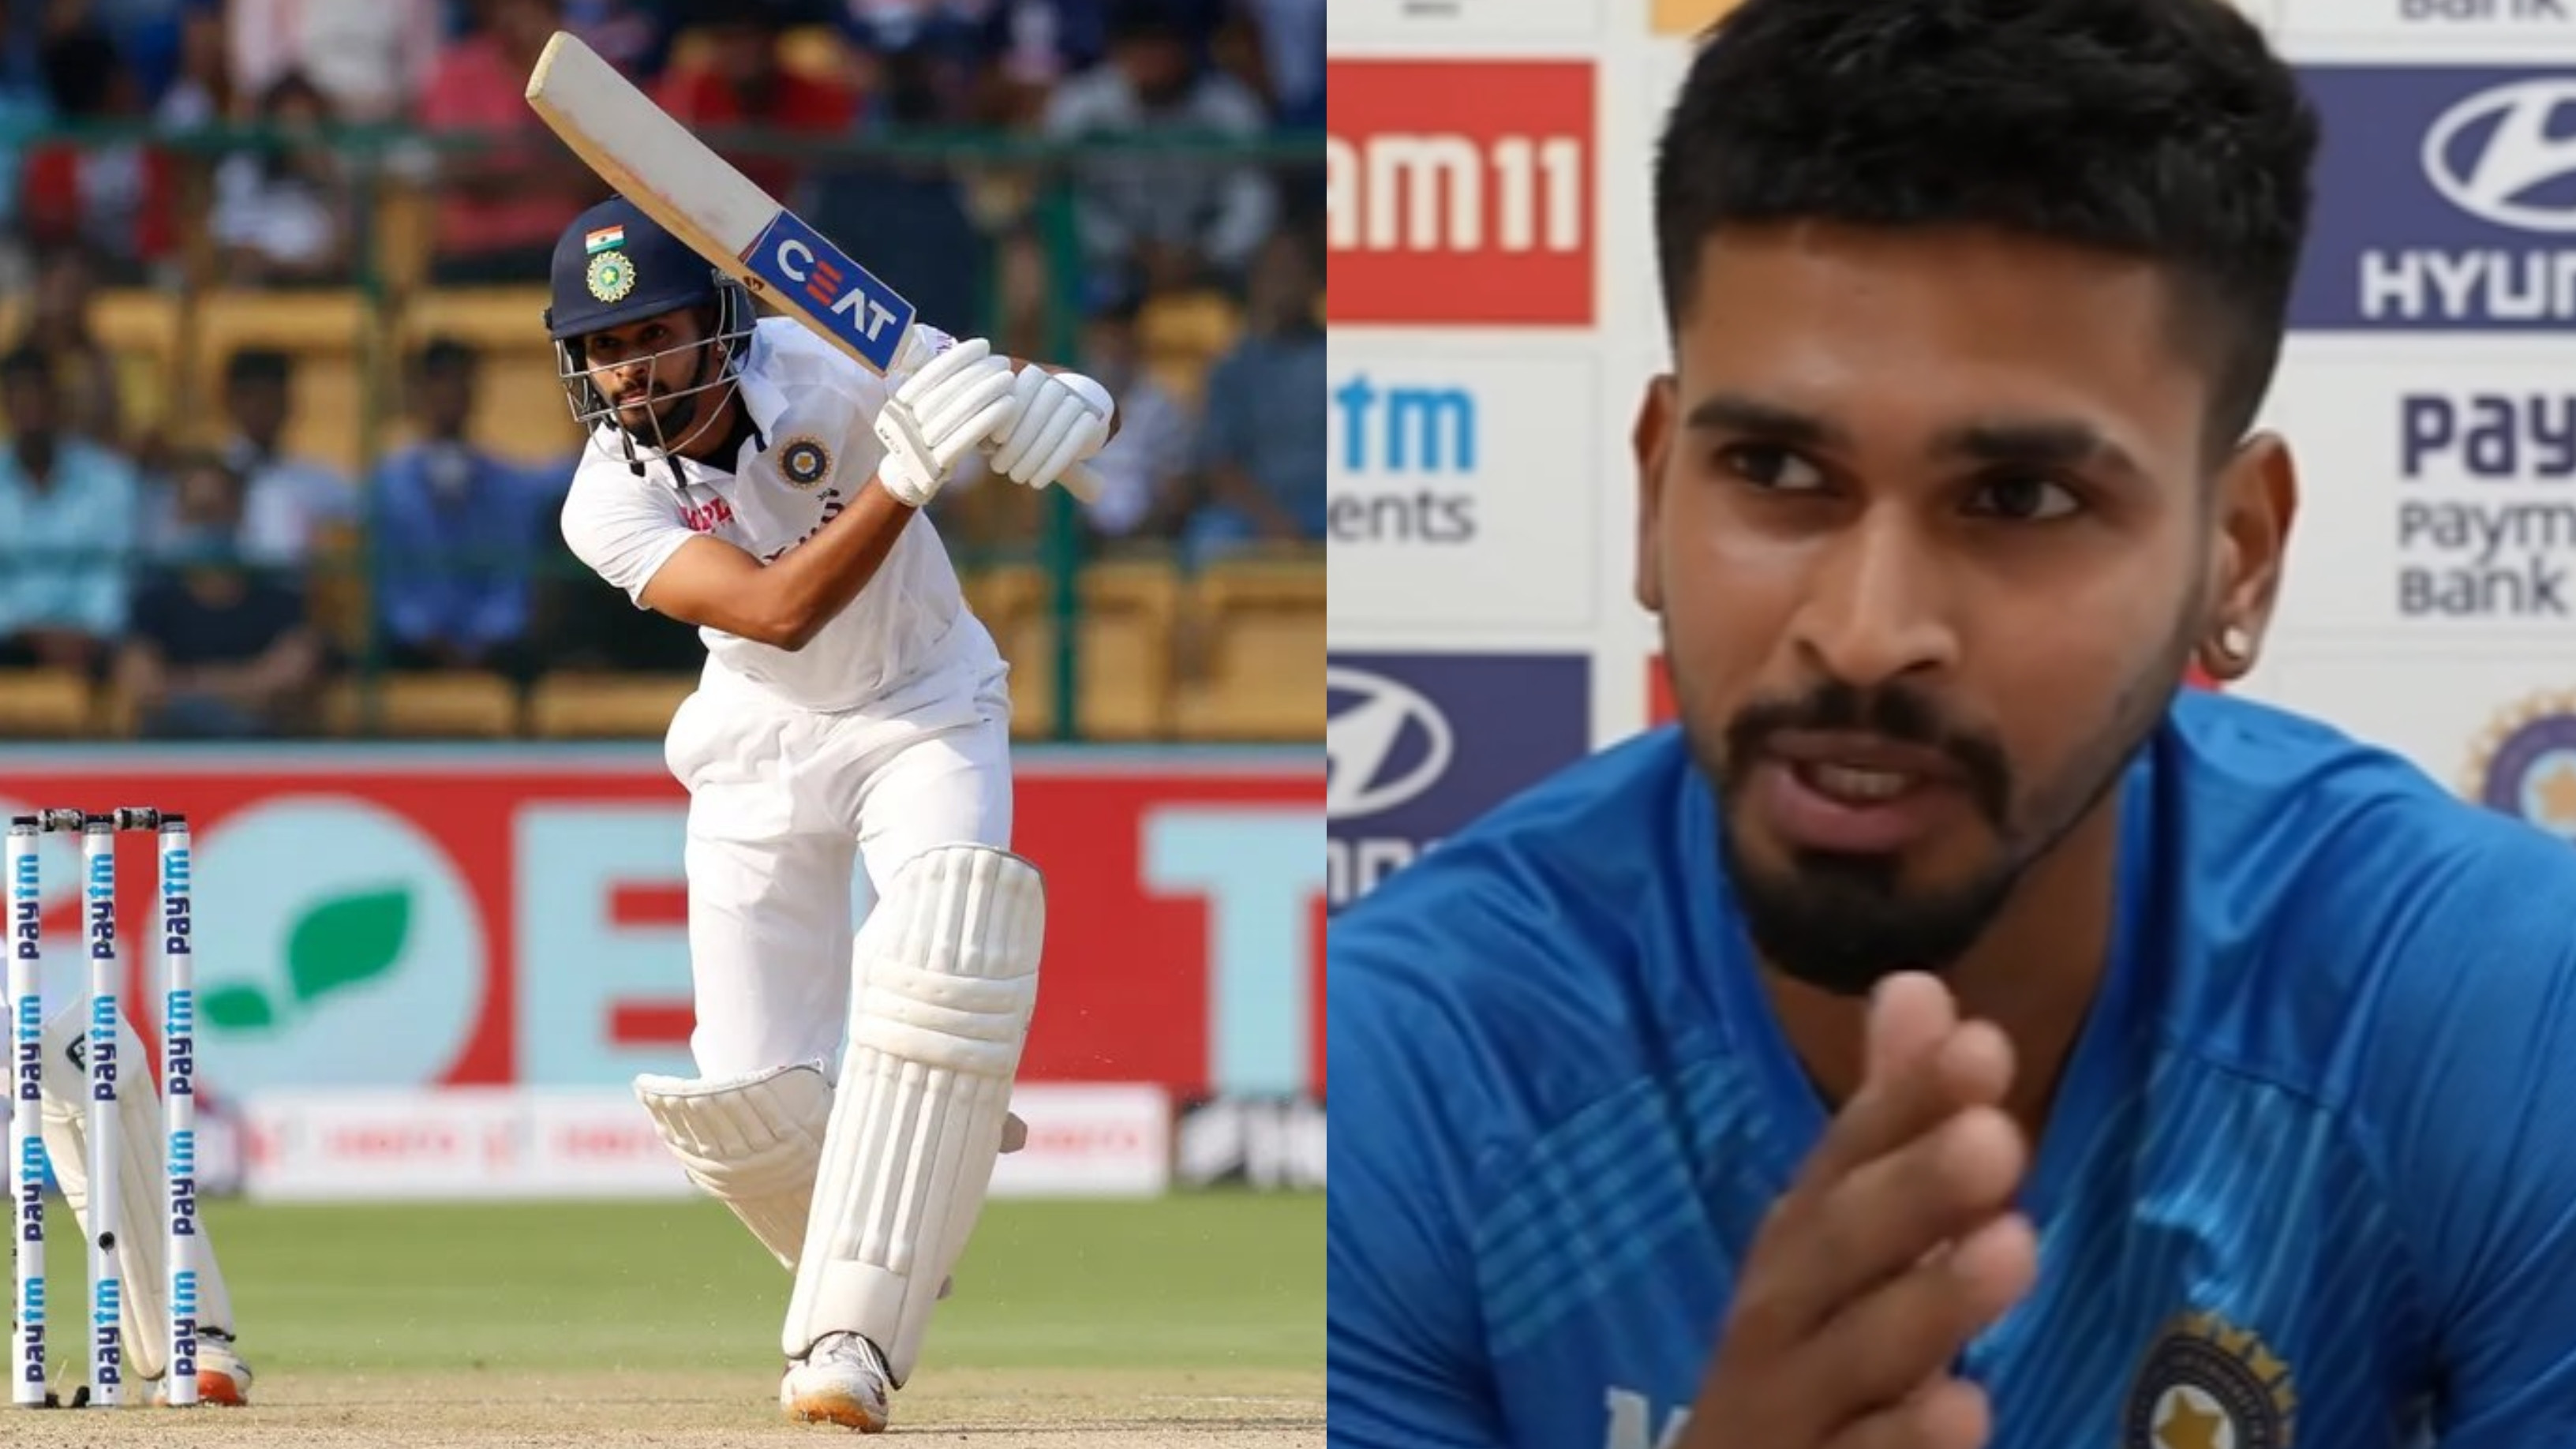 IND v SL 2022: ‘You can’t play negative on this wicket’, Shreyas Iyer on Chinnaswamy track after scoring 92